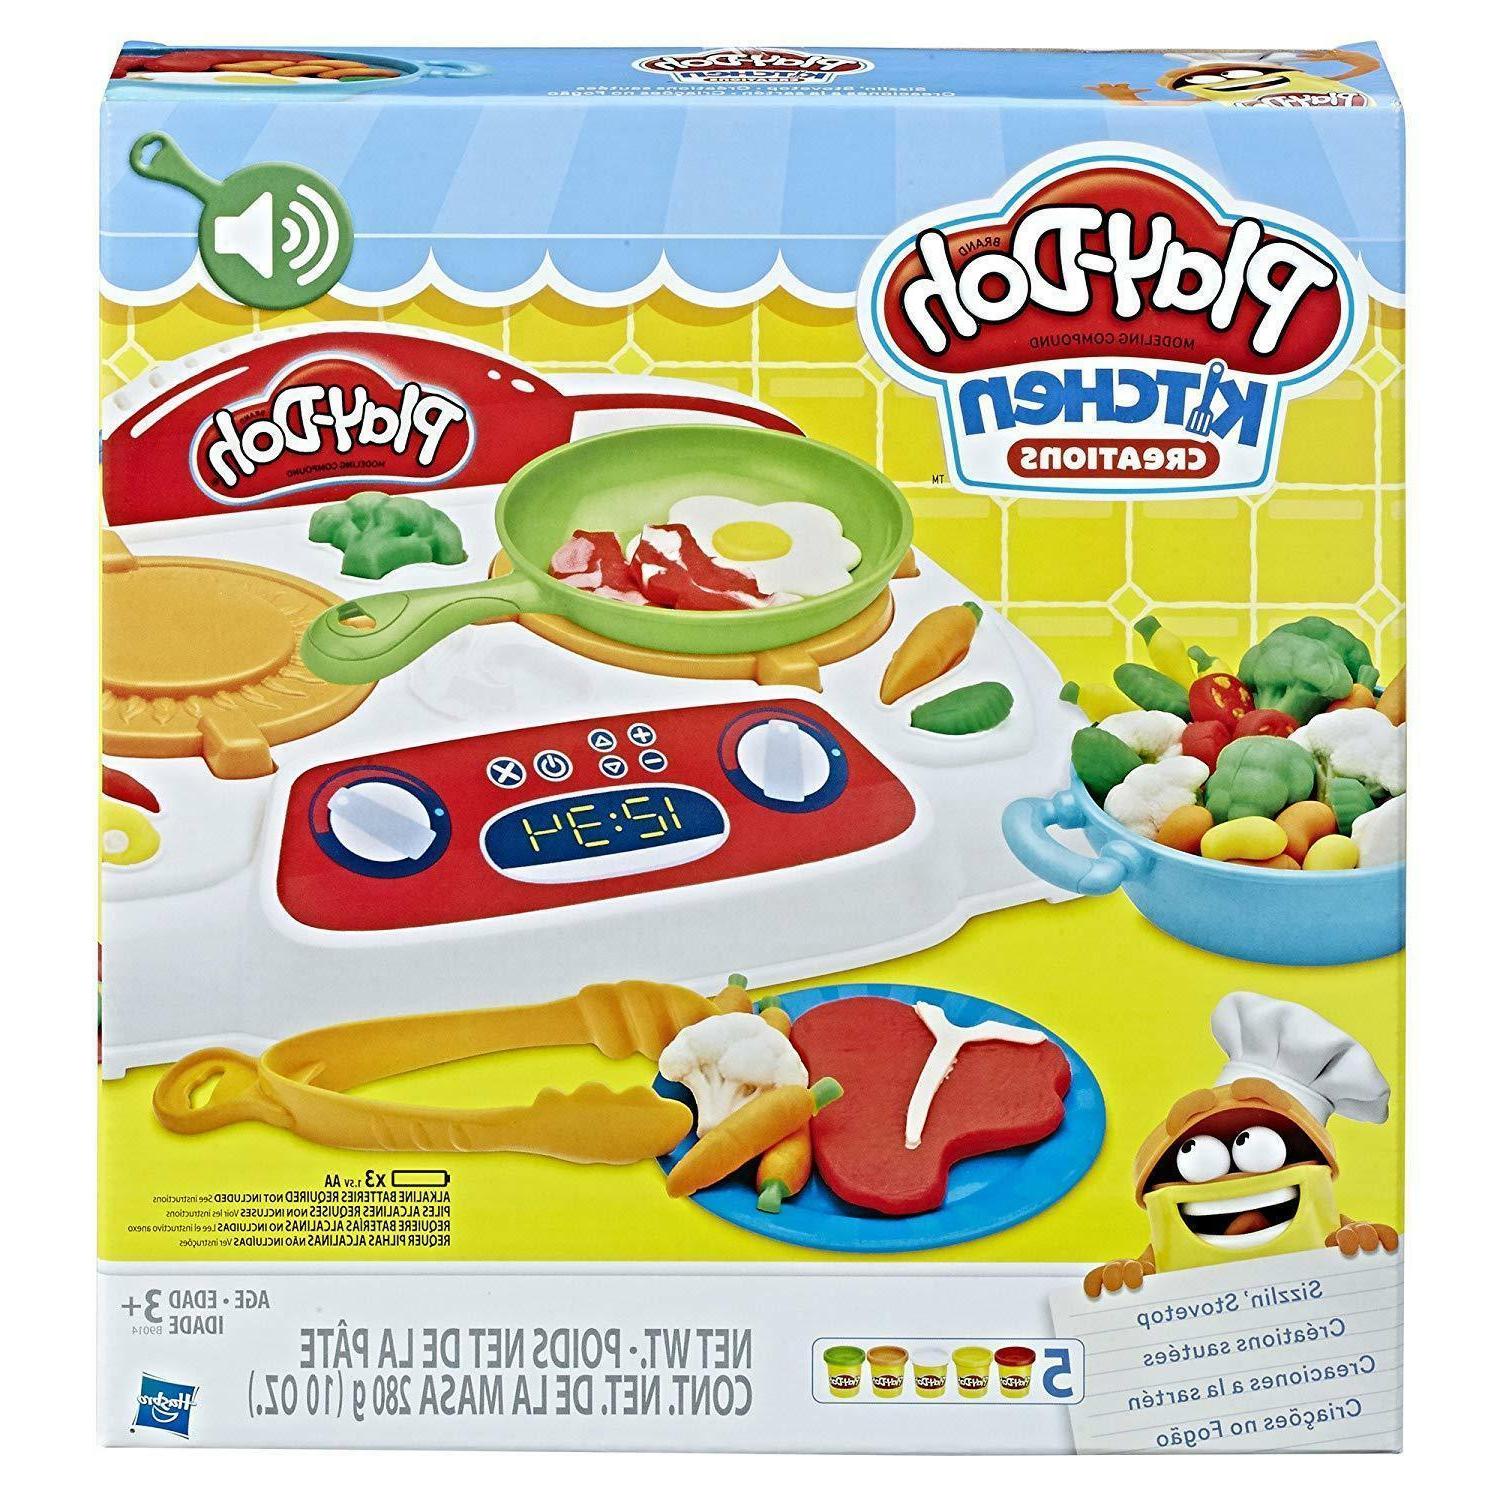 play doh kitchen creations sizzlin stovetop